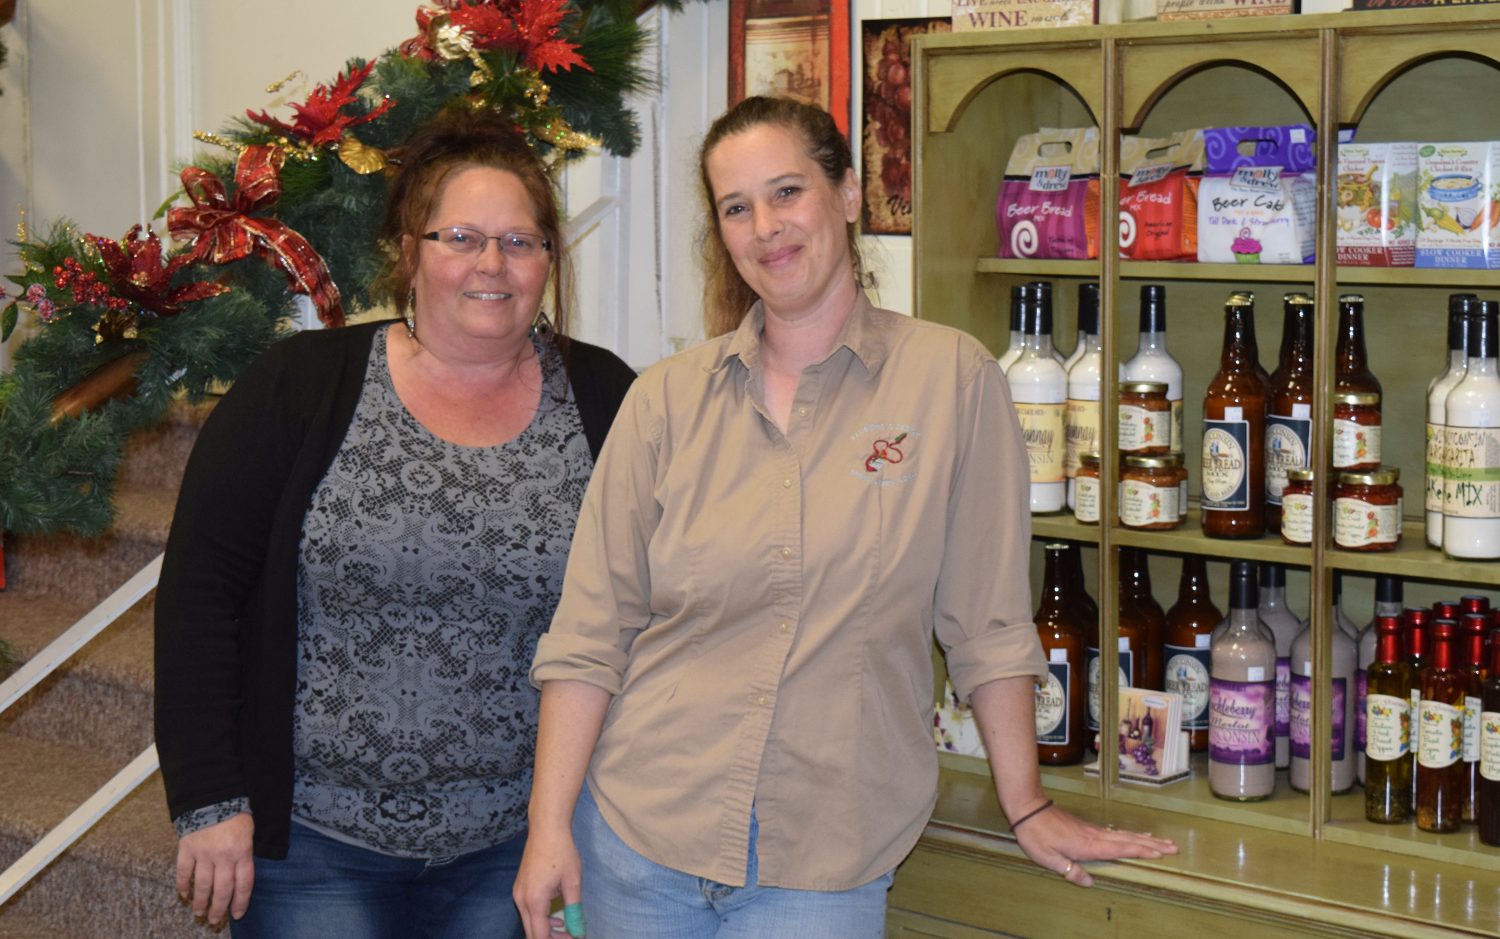 Illusions and Design manager Angie Young, left, and owner Sheri Dana stand by their expanded gourmet section at their new location.